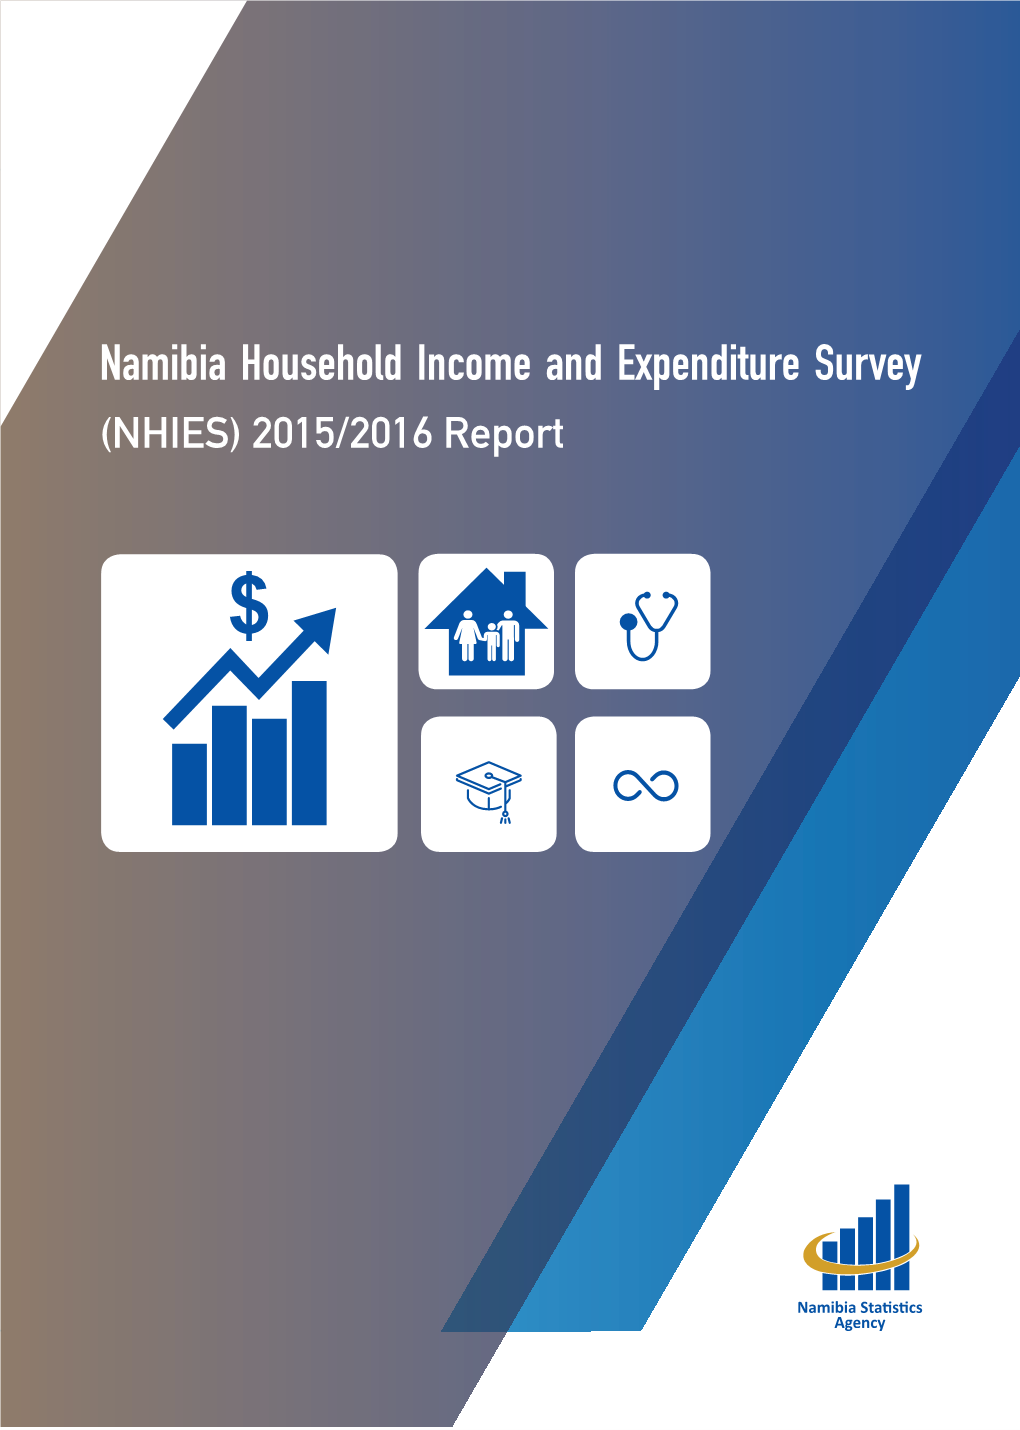 Namibia Household Income and Expenditure Survey (NHIES) 2015/2016 Report